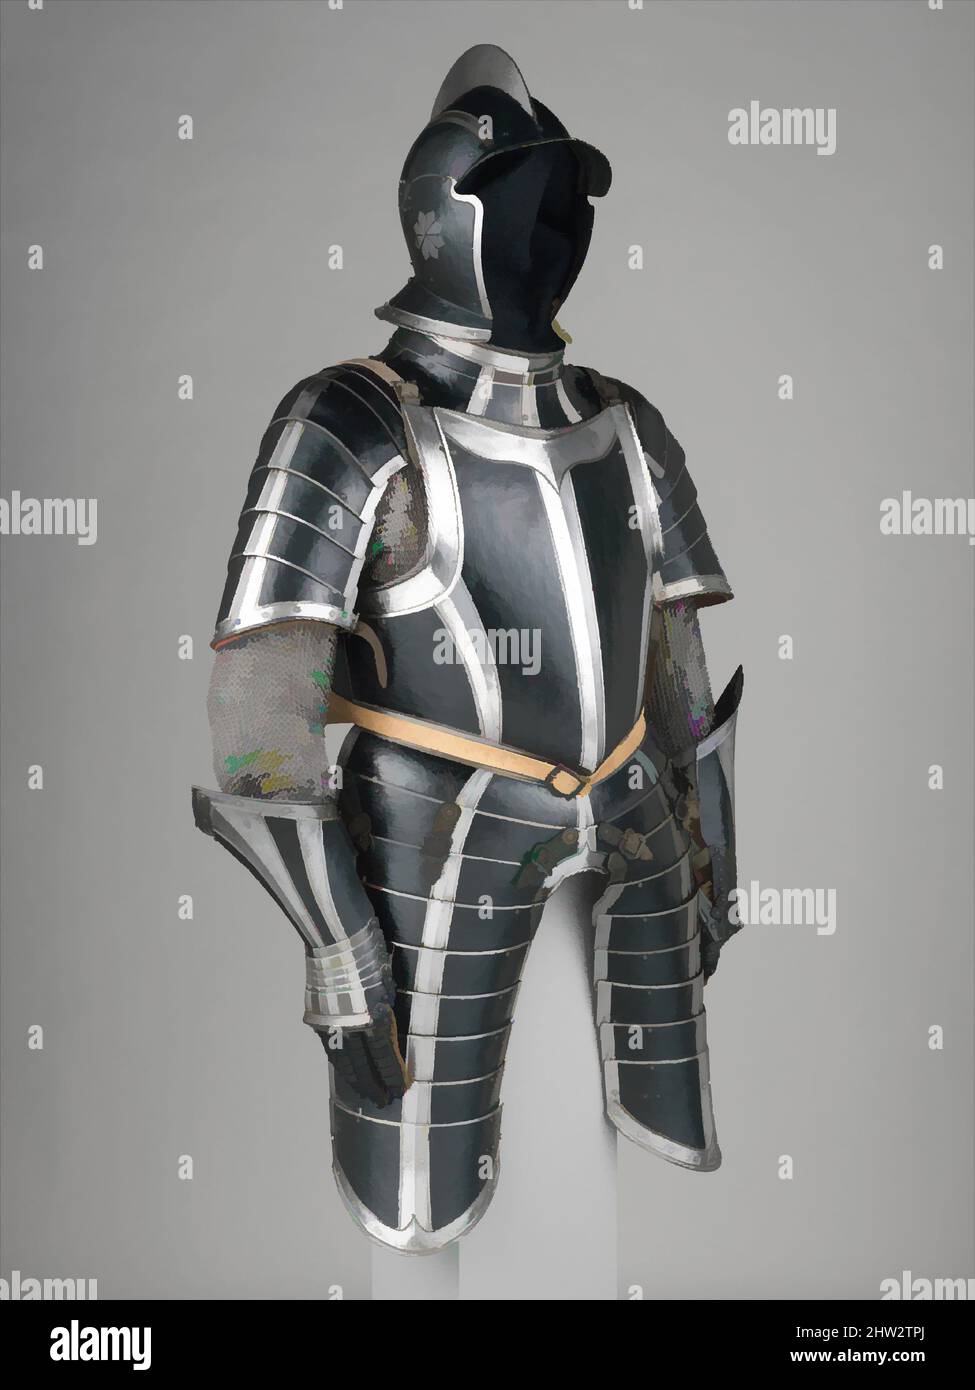 Art inspired by Infantry Armor, ca. 1600, Nuremberg, German, Nuremberg, Steel, leather, H. 49 1/14 in. (125 cm), Armor for Man-1/2 Armor, The armorers of Nuremberg were famous for their ability to produce large quantities of plate armor relatively quickly. In the second half of the, Classic works modernized by Artotop with a splash of modernity. Shapes, color and value, eye-catching visual impact on art. Emotions through freedom of artworks in a contemporary way. A timeless message pursuing a wildly creative new direction. Artists turning to the digital medium and creating the Artotop NFT Stock Photo